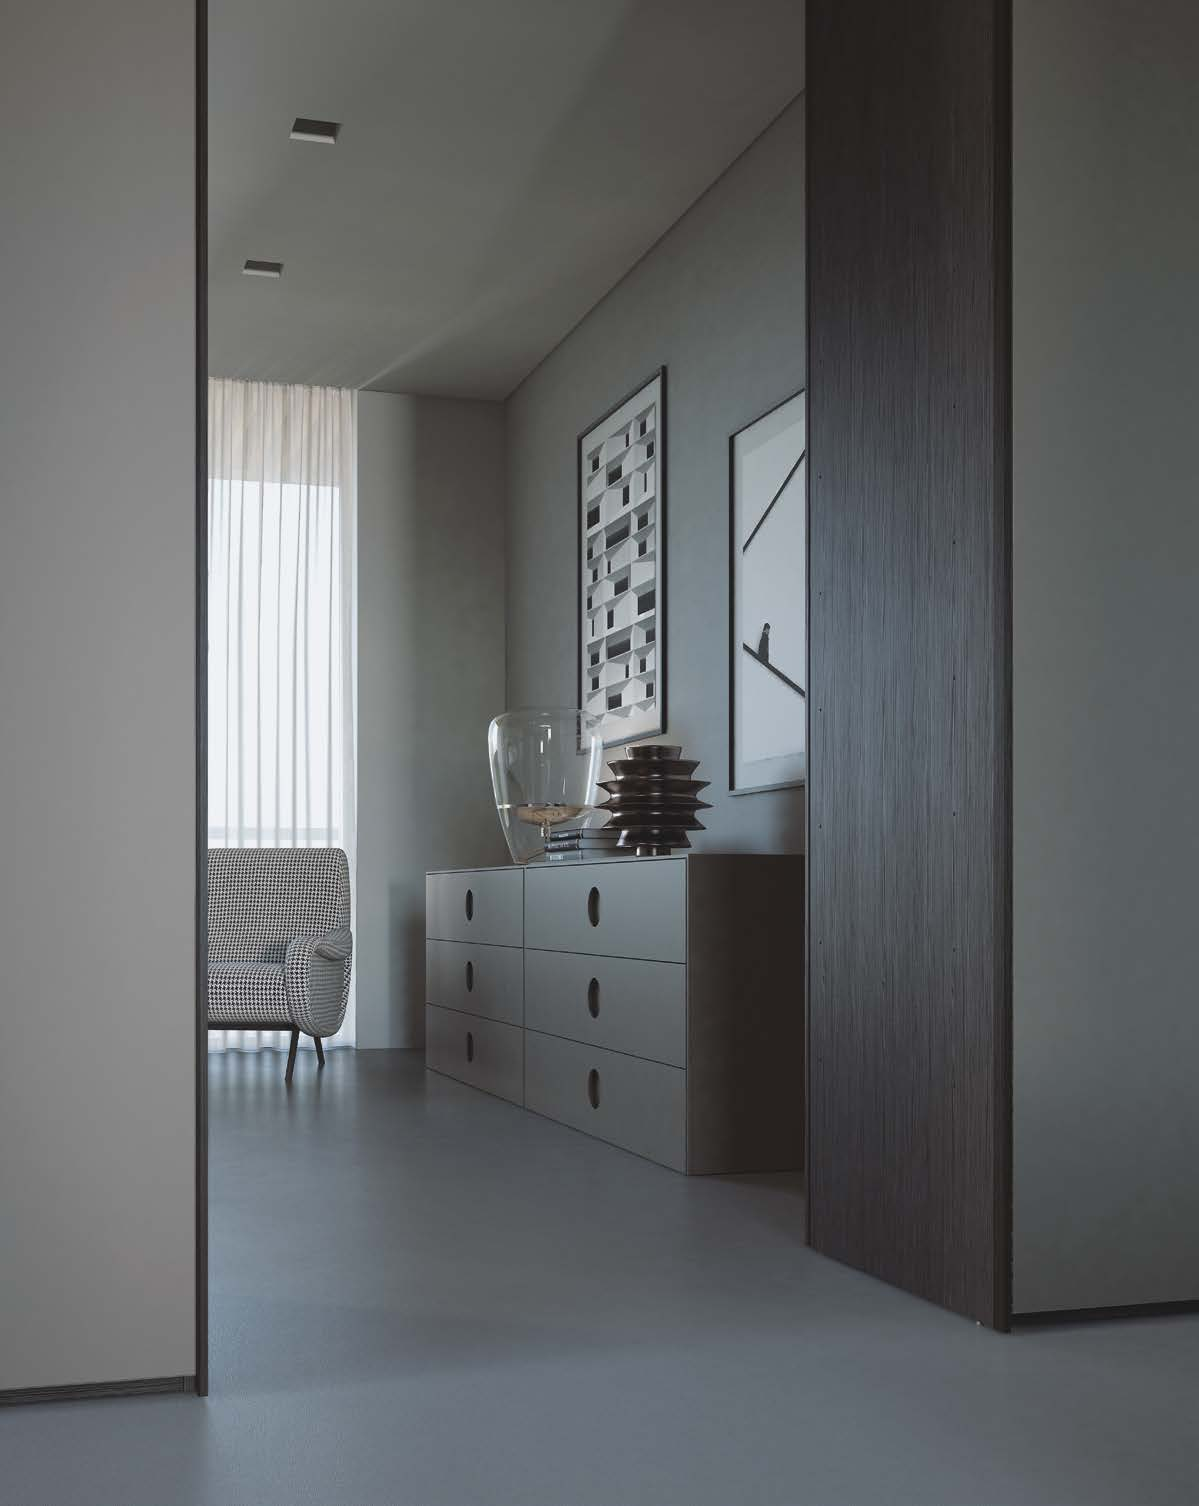 Above and left: Oblò chest of drawers in matt